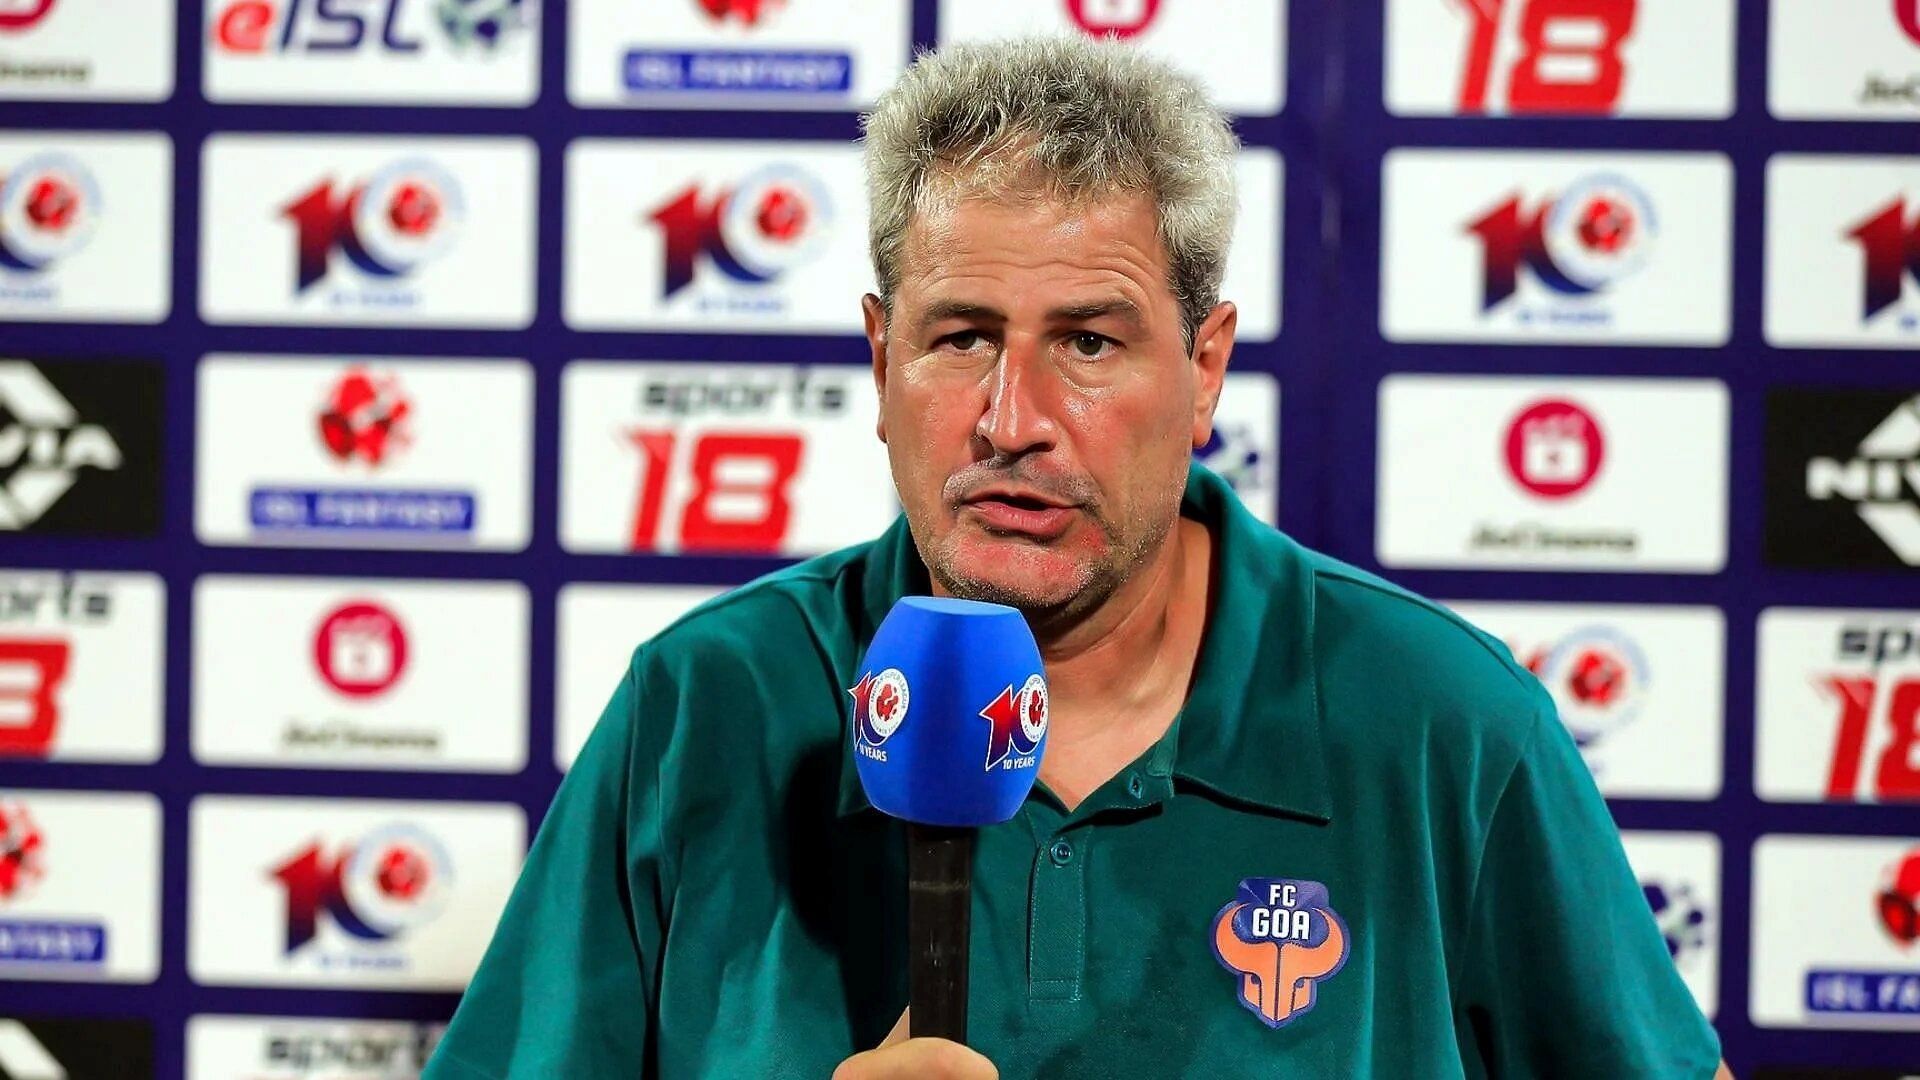 FC Goa head coach Manolo Marquez has stated the upcoming semifinal fixtures against Mumbai City FC will not just be a difficult challenge for his team but also for the Islanders